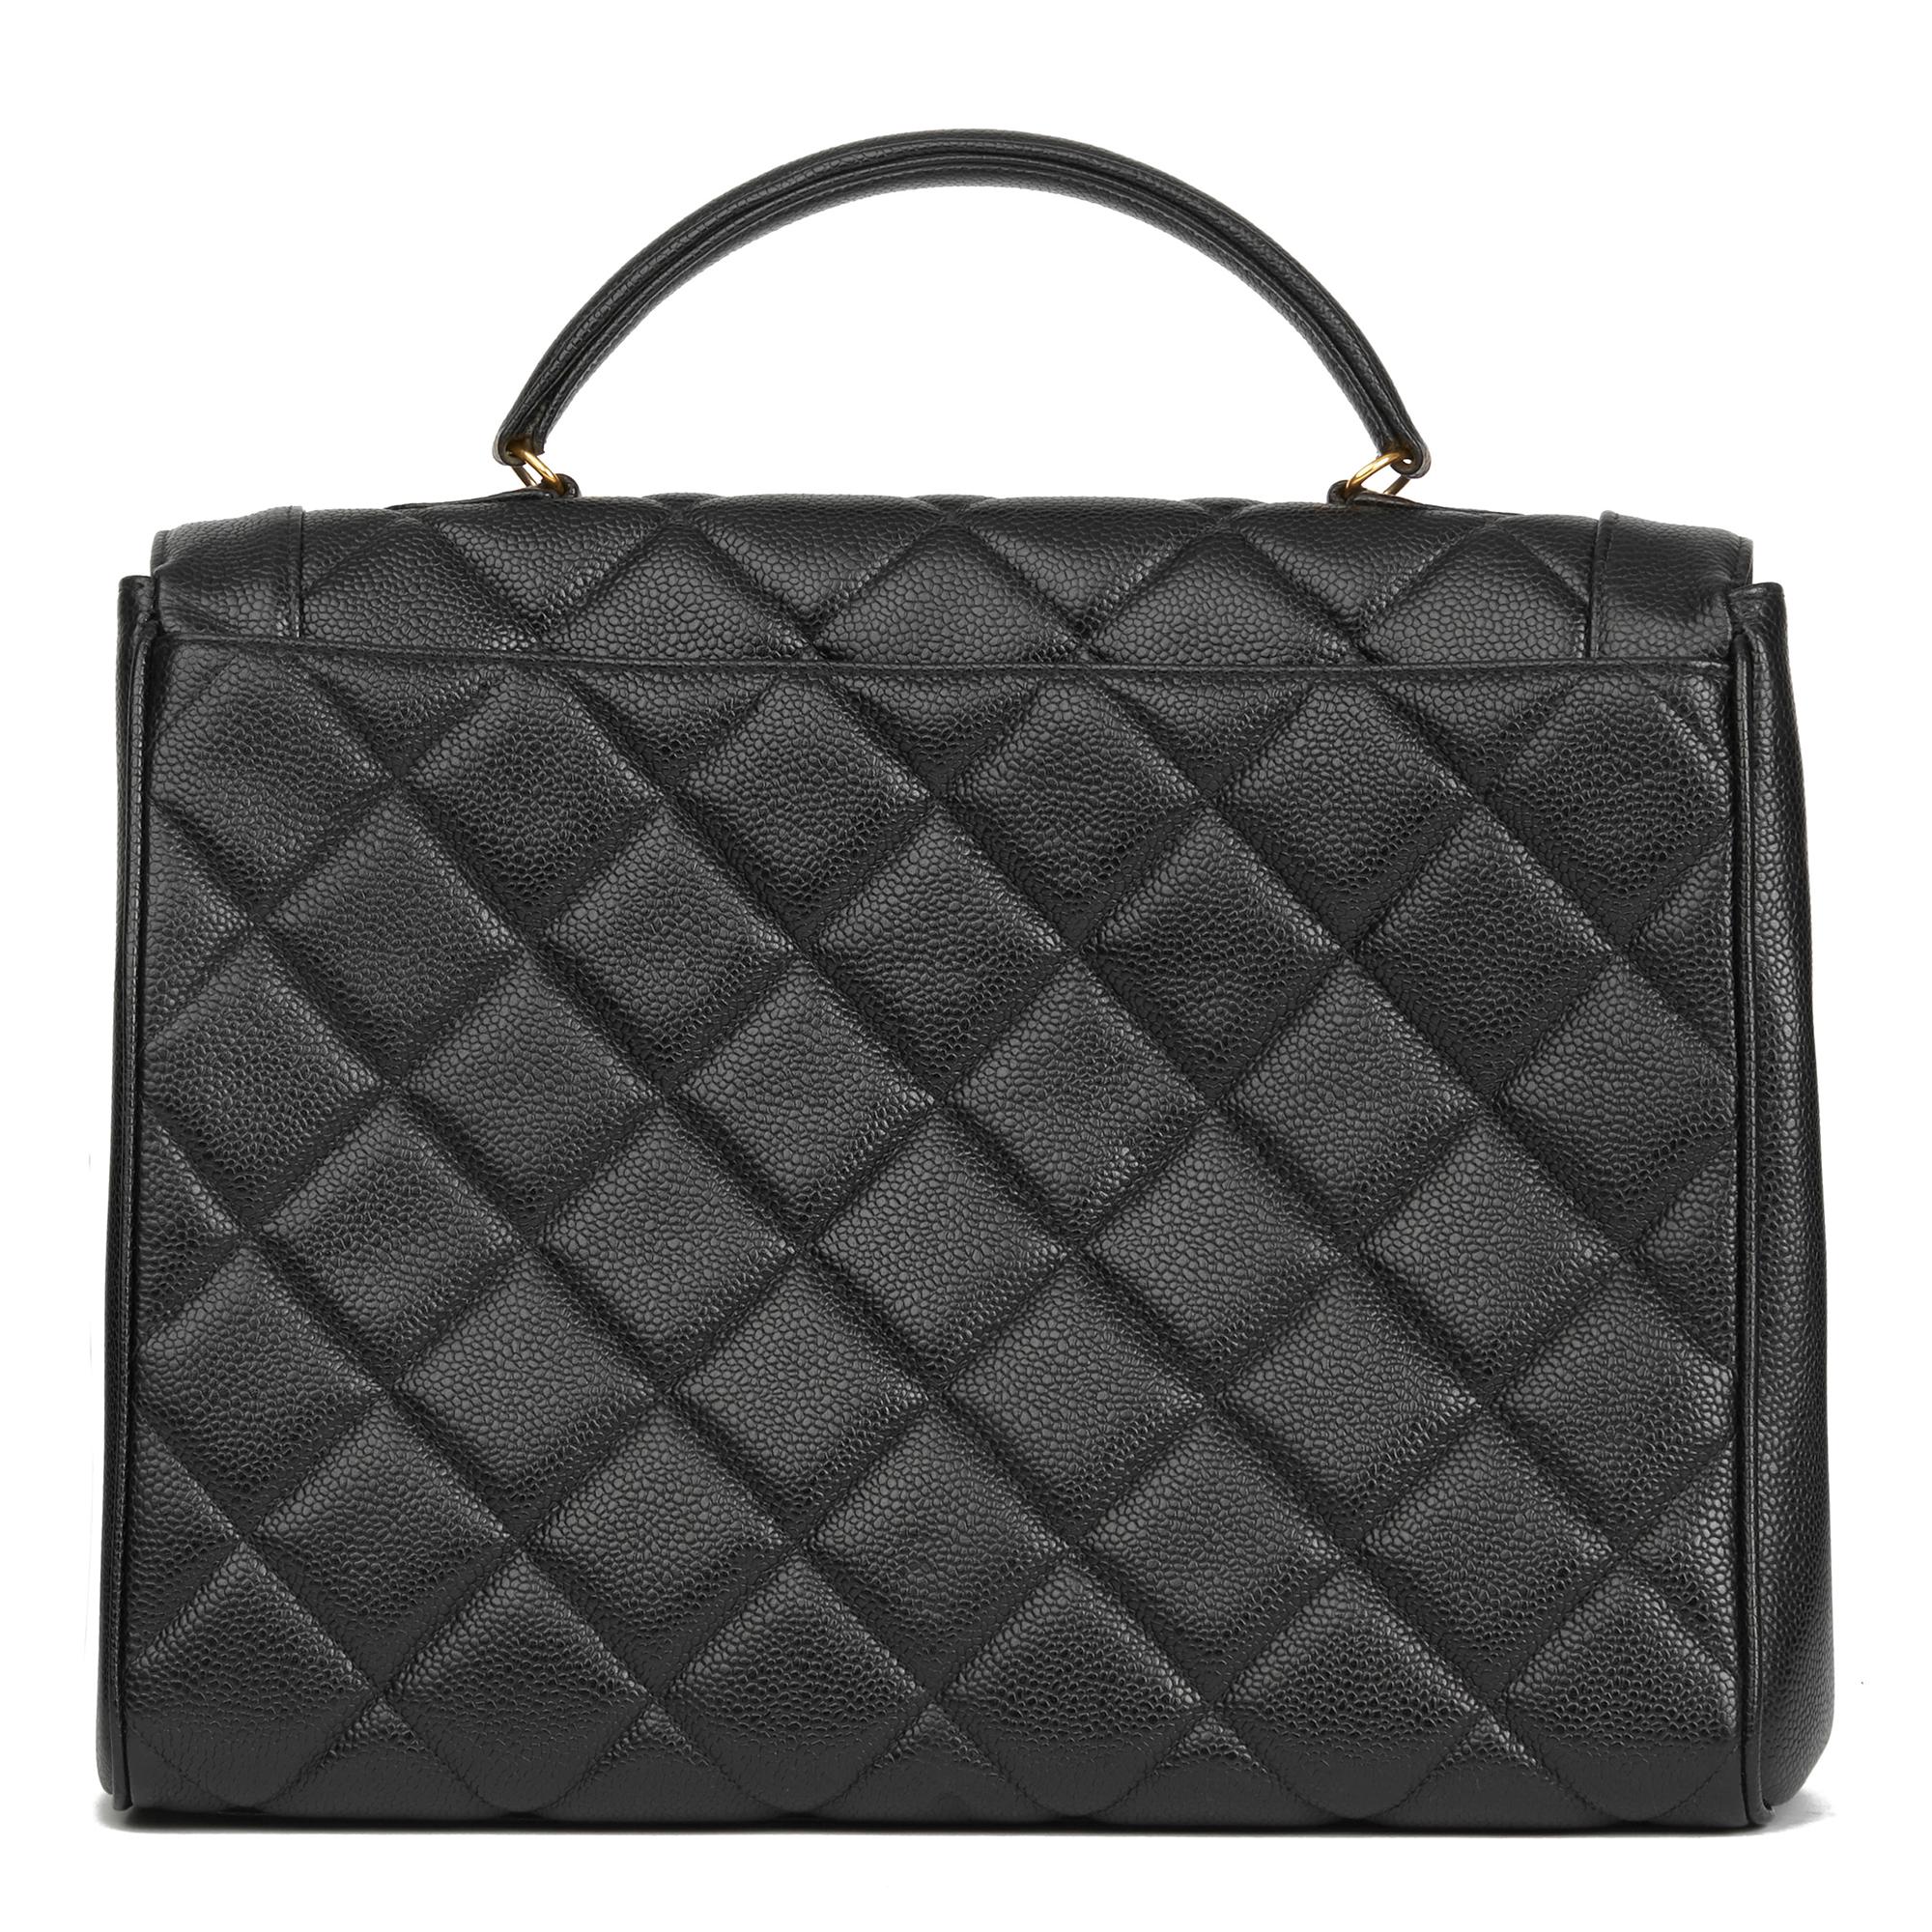 Women's 1993 Chanel Black Quilted Caviar Leather Vintage Classic Kelly